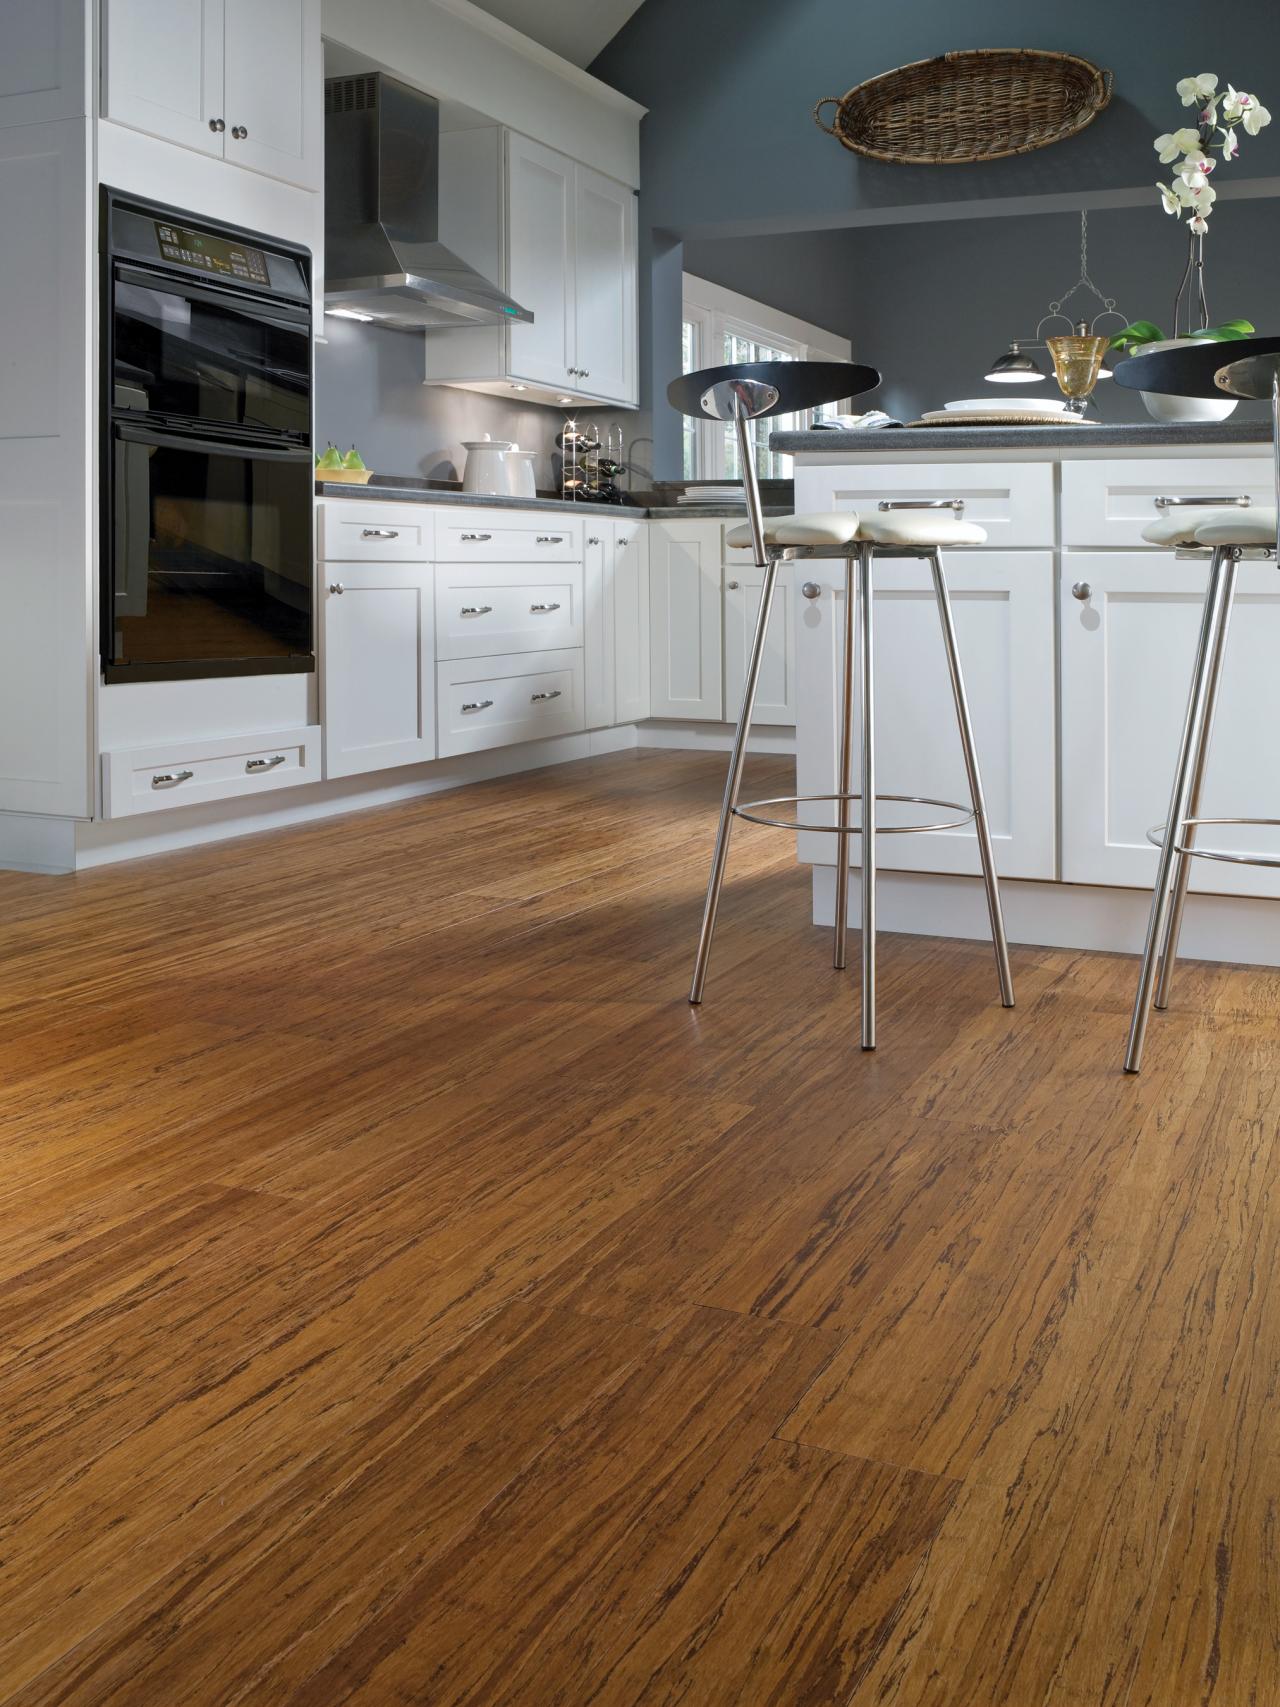 Pros And Cons Of Bamboo Flooring, Is Bamboo Hardwood Flooring Any Good